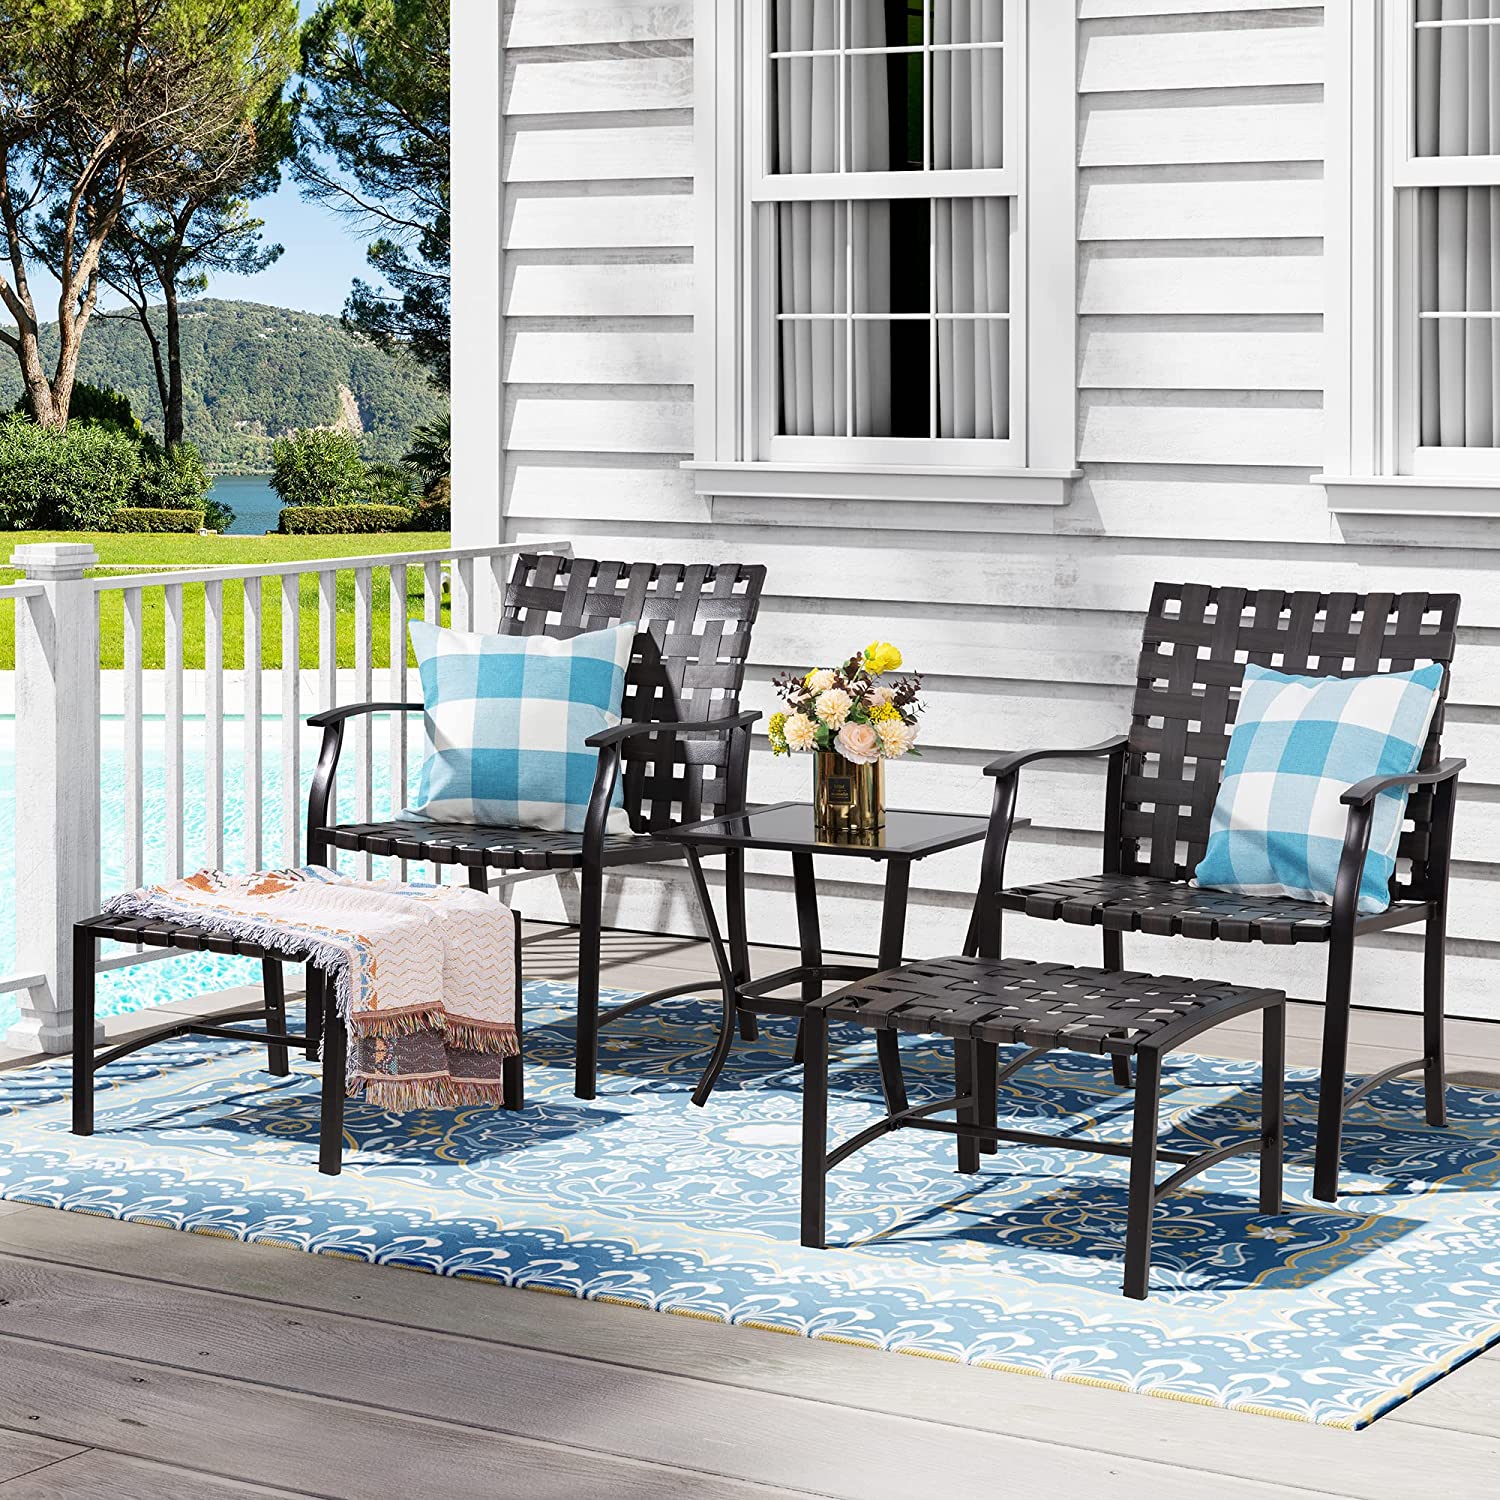 5 Piece Patio Conversation Set Lounge Chair Sofa, Patio Dining Chair Wicker furniture set with glass coffee table (US spot) | Decor Gifts and More